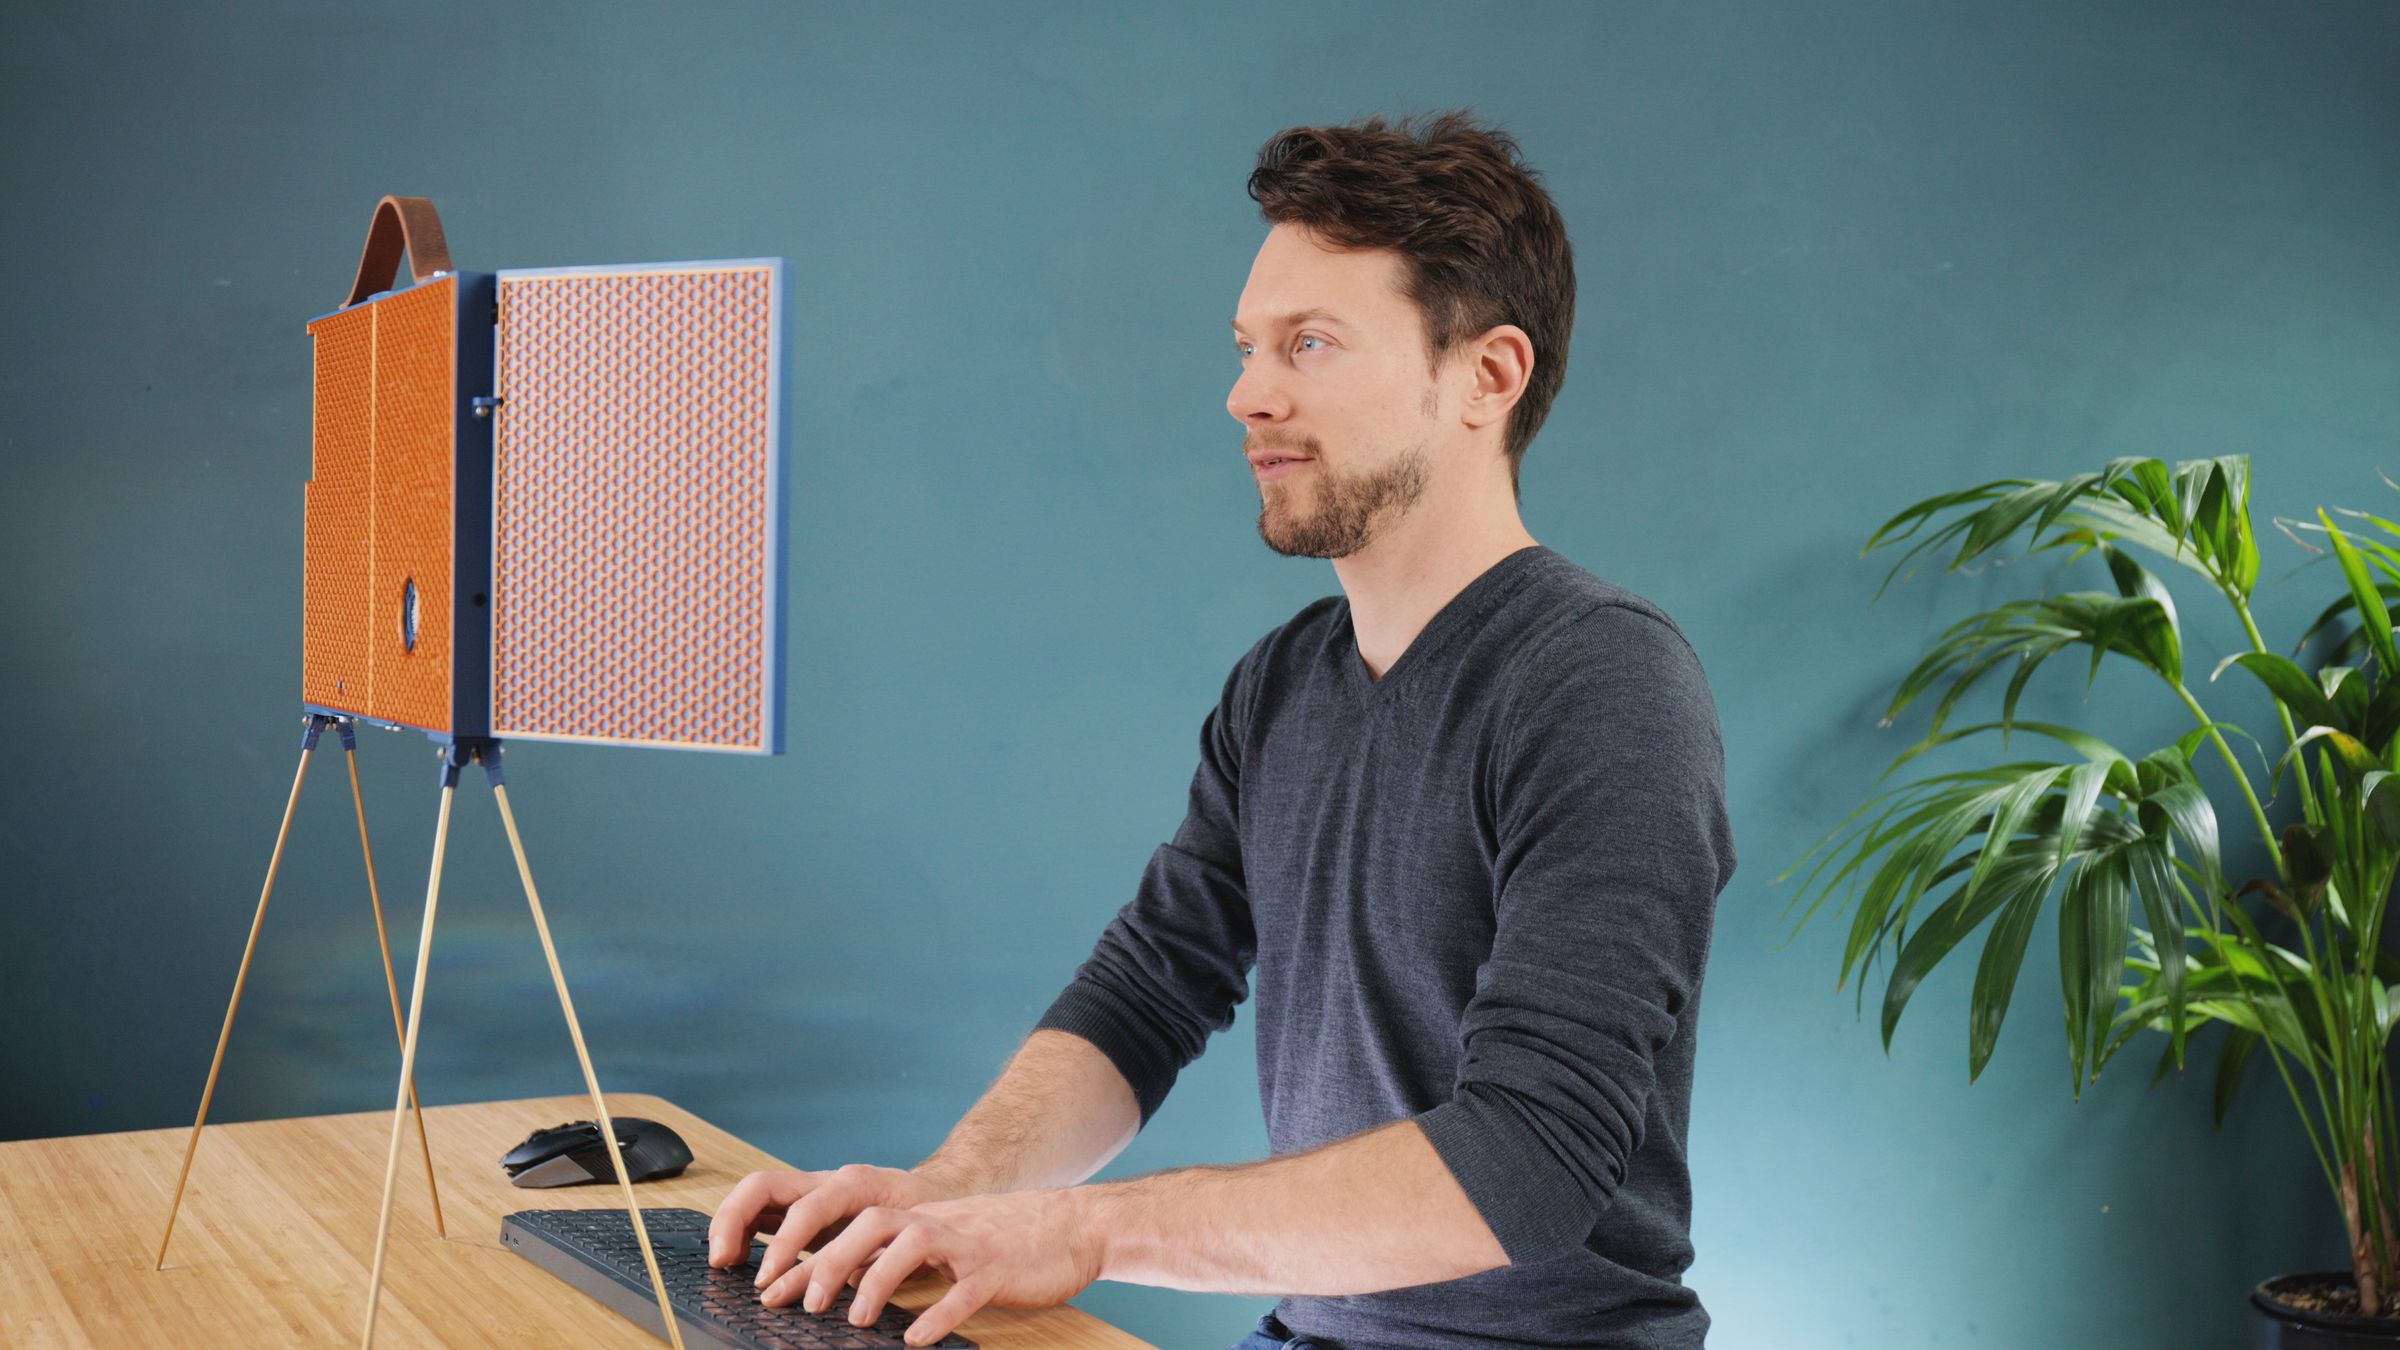 An image of the creator of the DIY Framework build sitting in front of it, typing with nice posture.